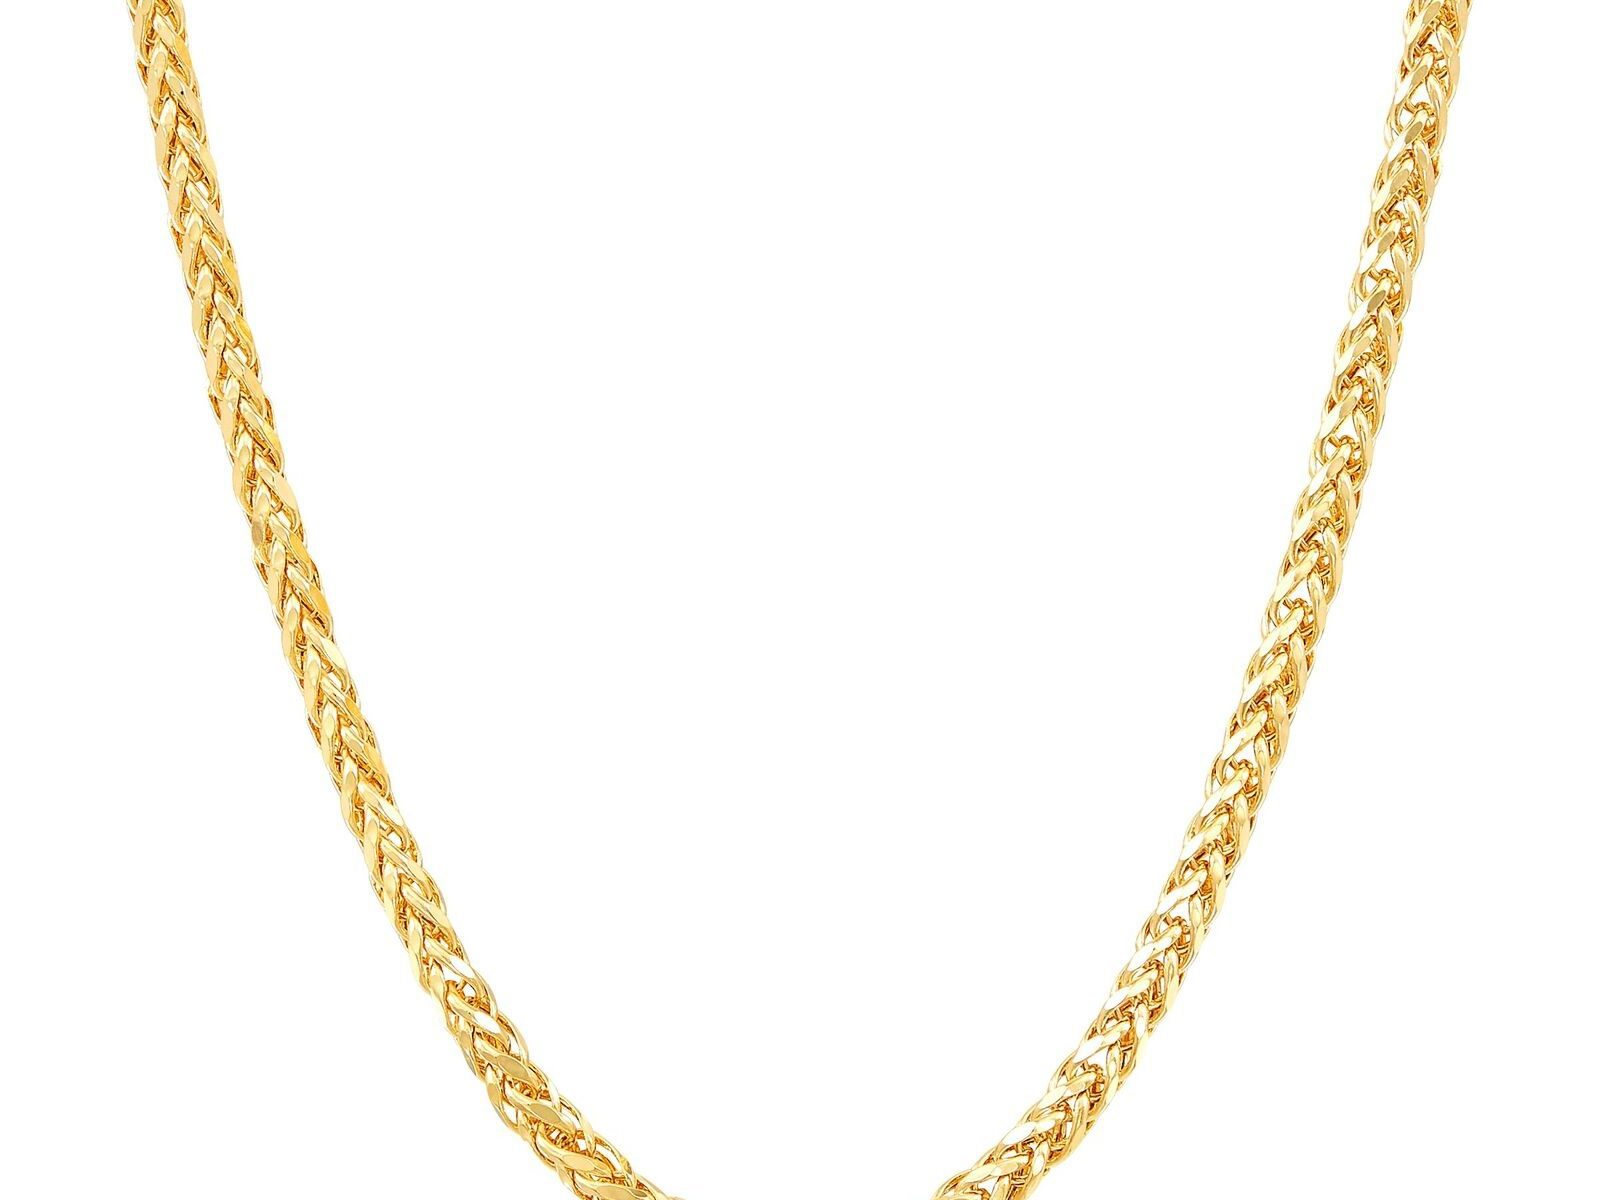 Italian-Made Classic Spiga Link Chain Necklace in 14K Gold, 22"